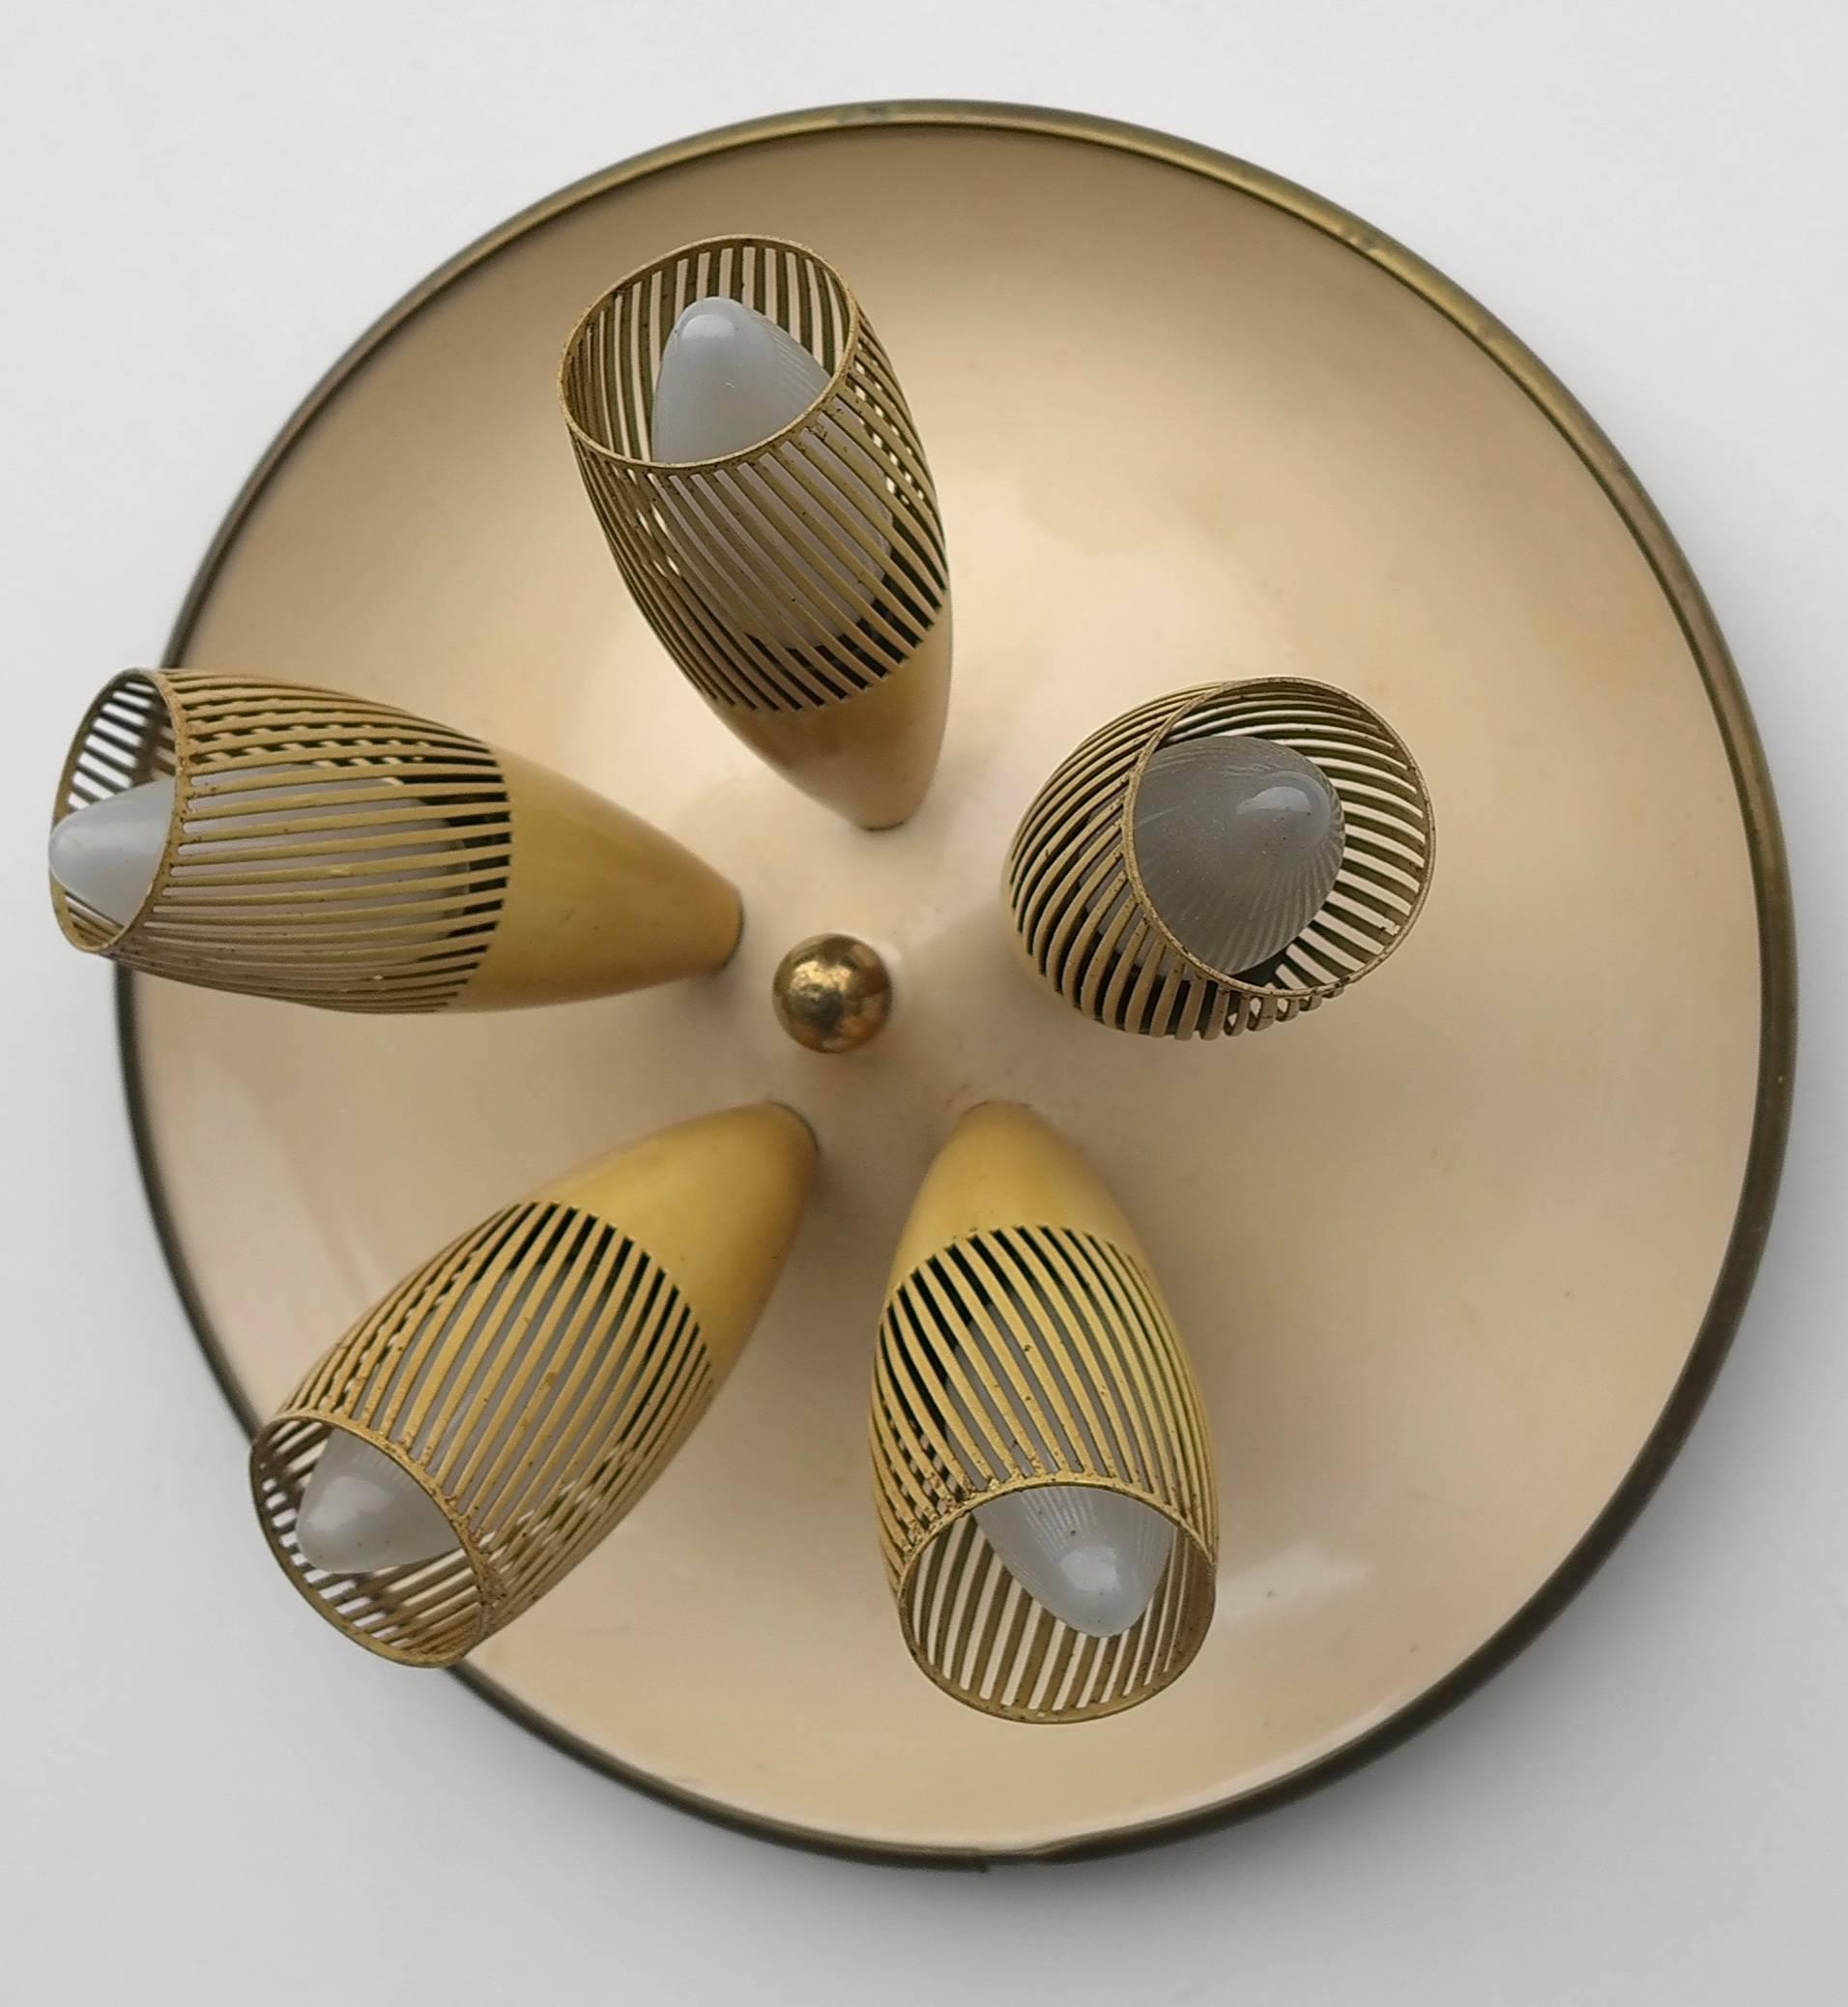 Italian yellow disk wall lamp 1950s with five metal perforated shades.

This lamp can also be used on the ceiling as a flush mount.